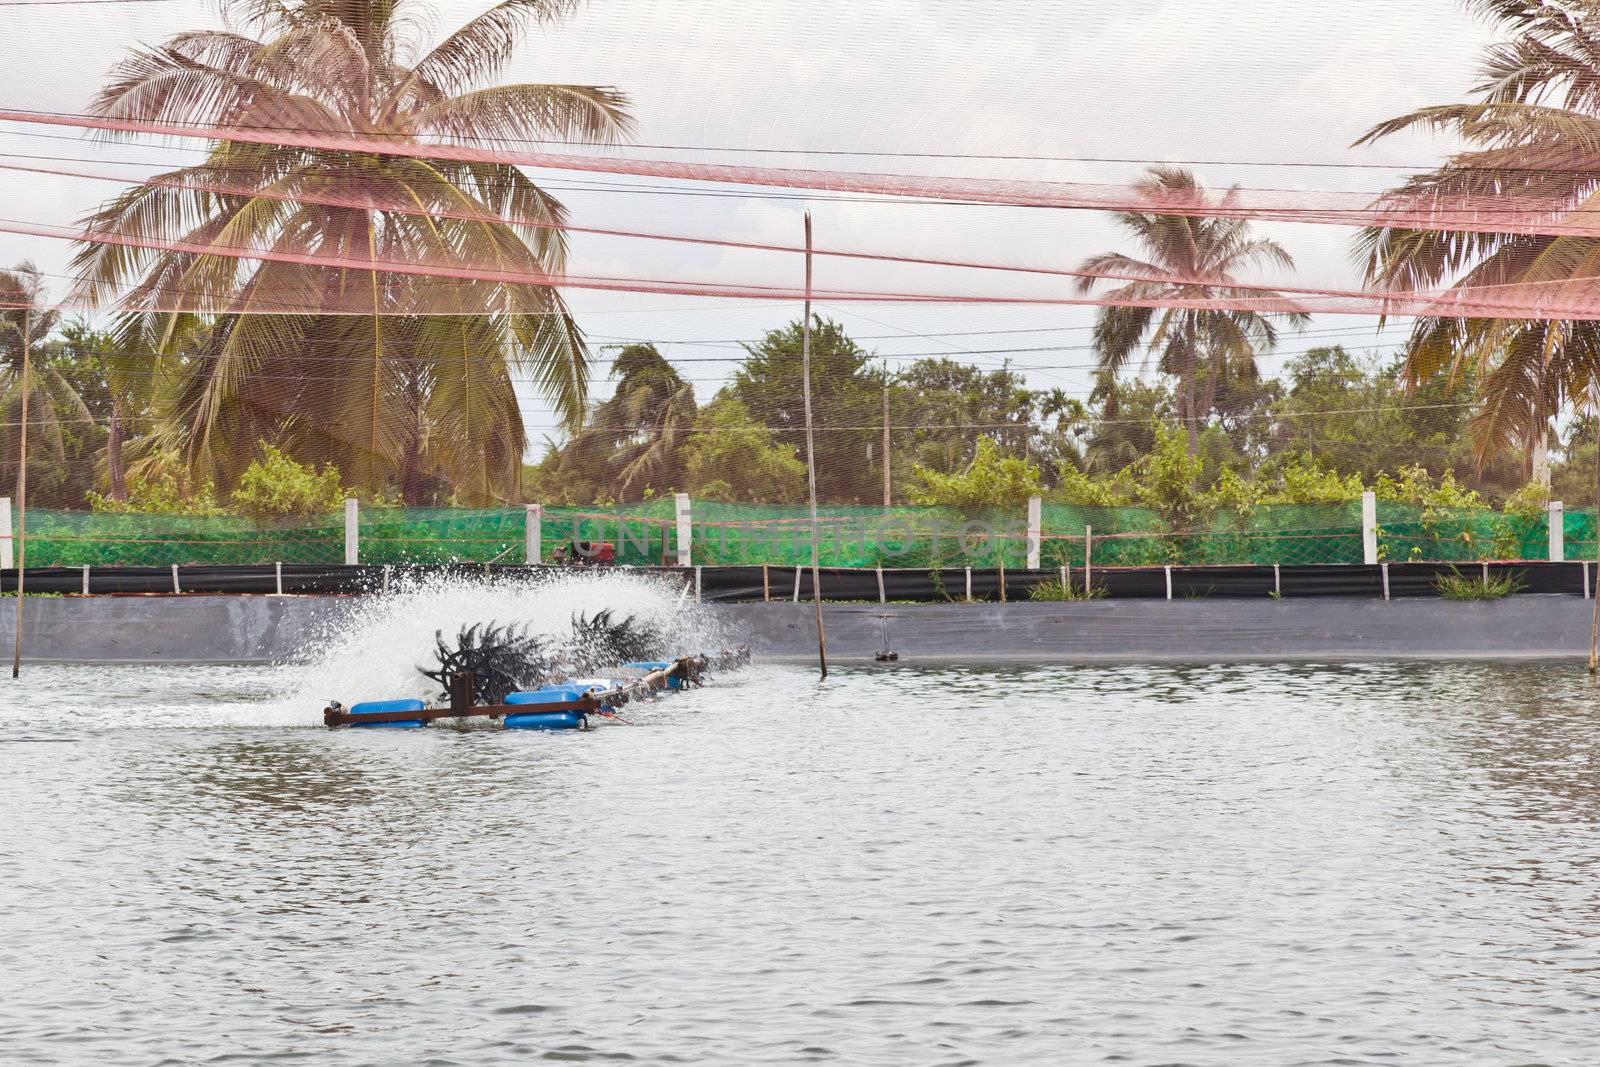 Water treatment of Shrimp Farms covered with nets for protection from bird, ChaChengSao, Thailand